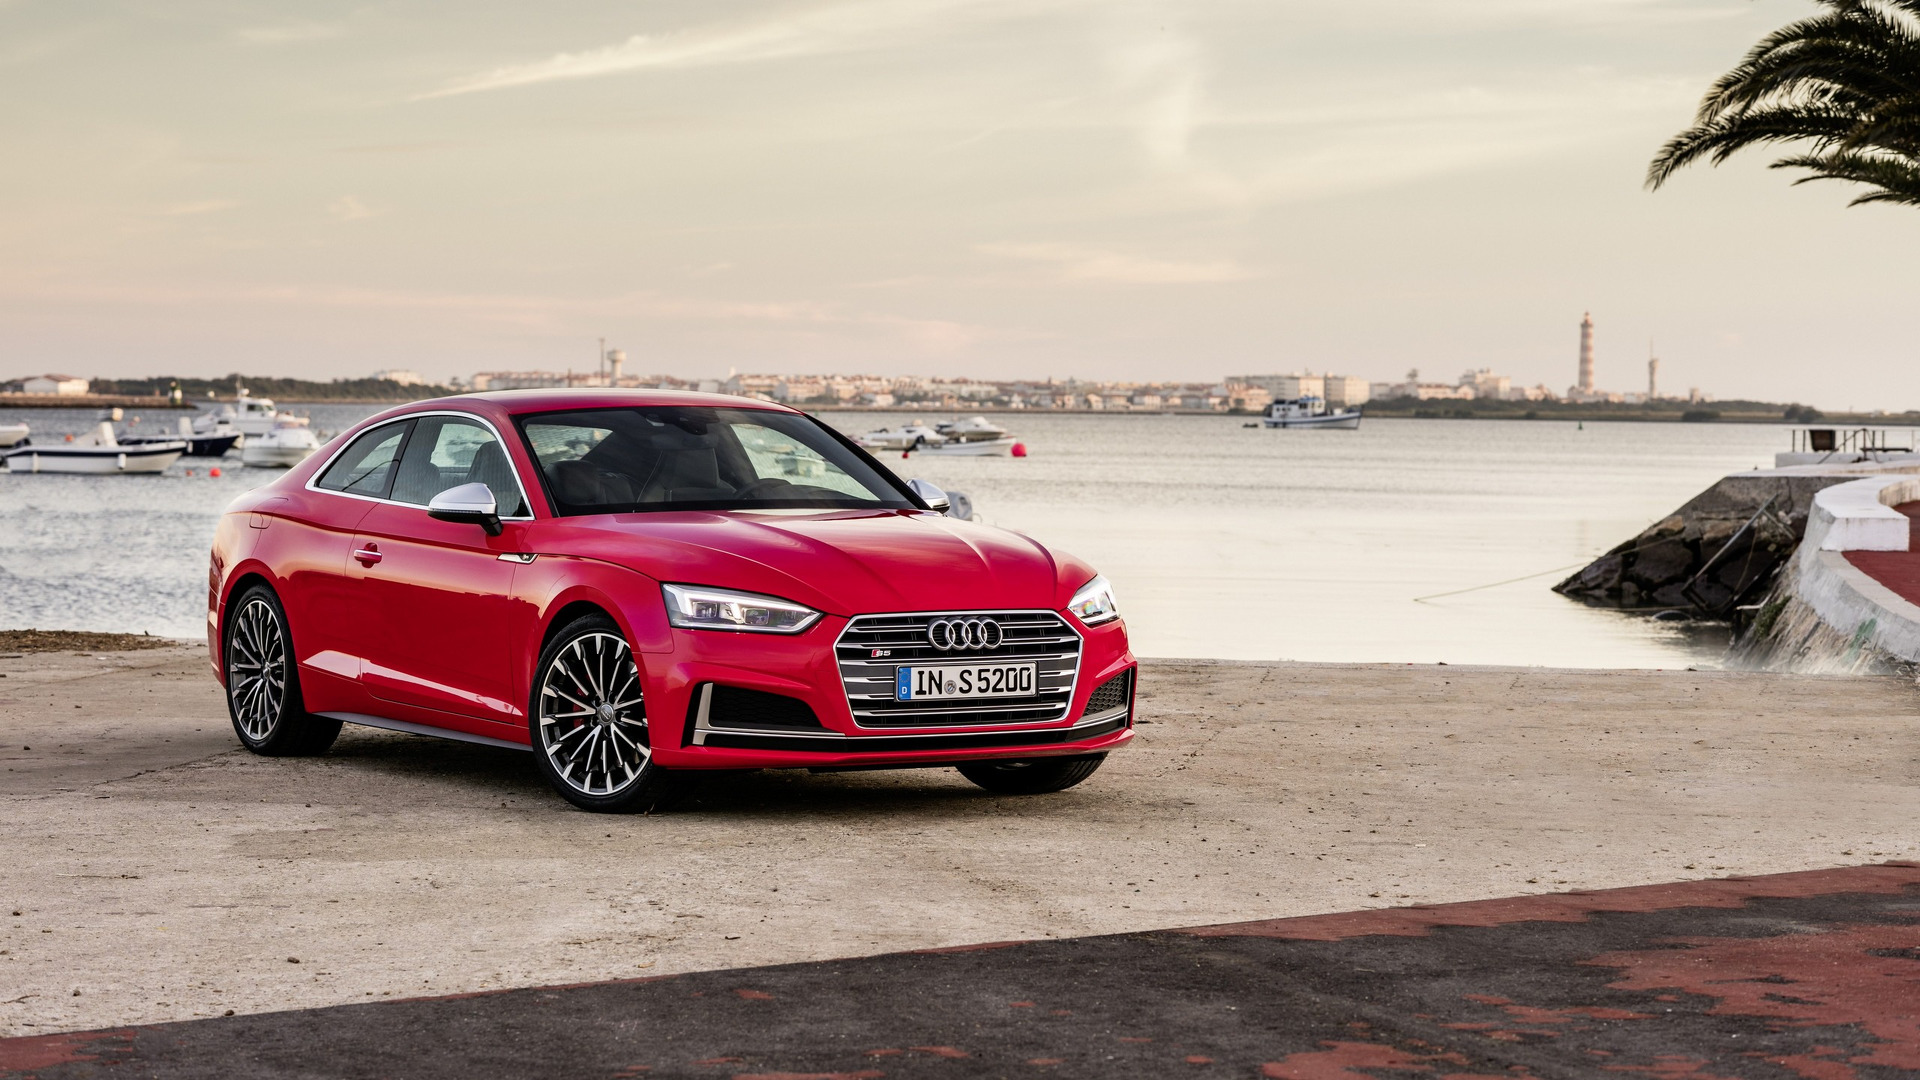 How To Rent A Audi A5 Coupe In Dubai